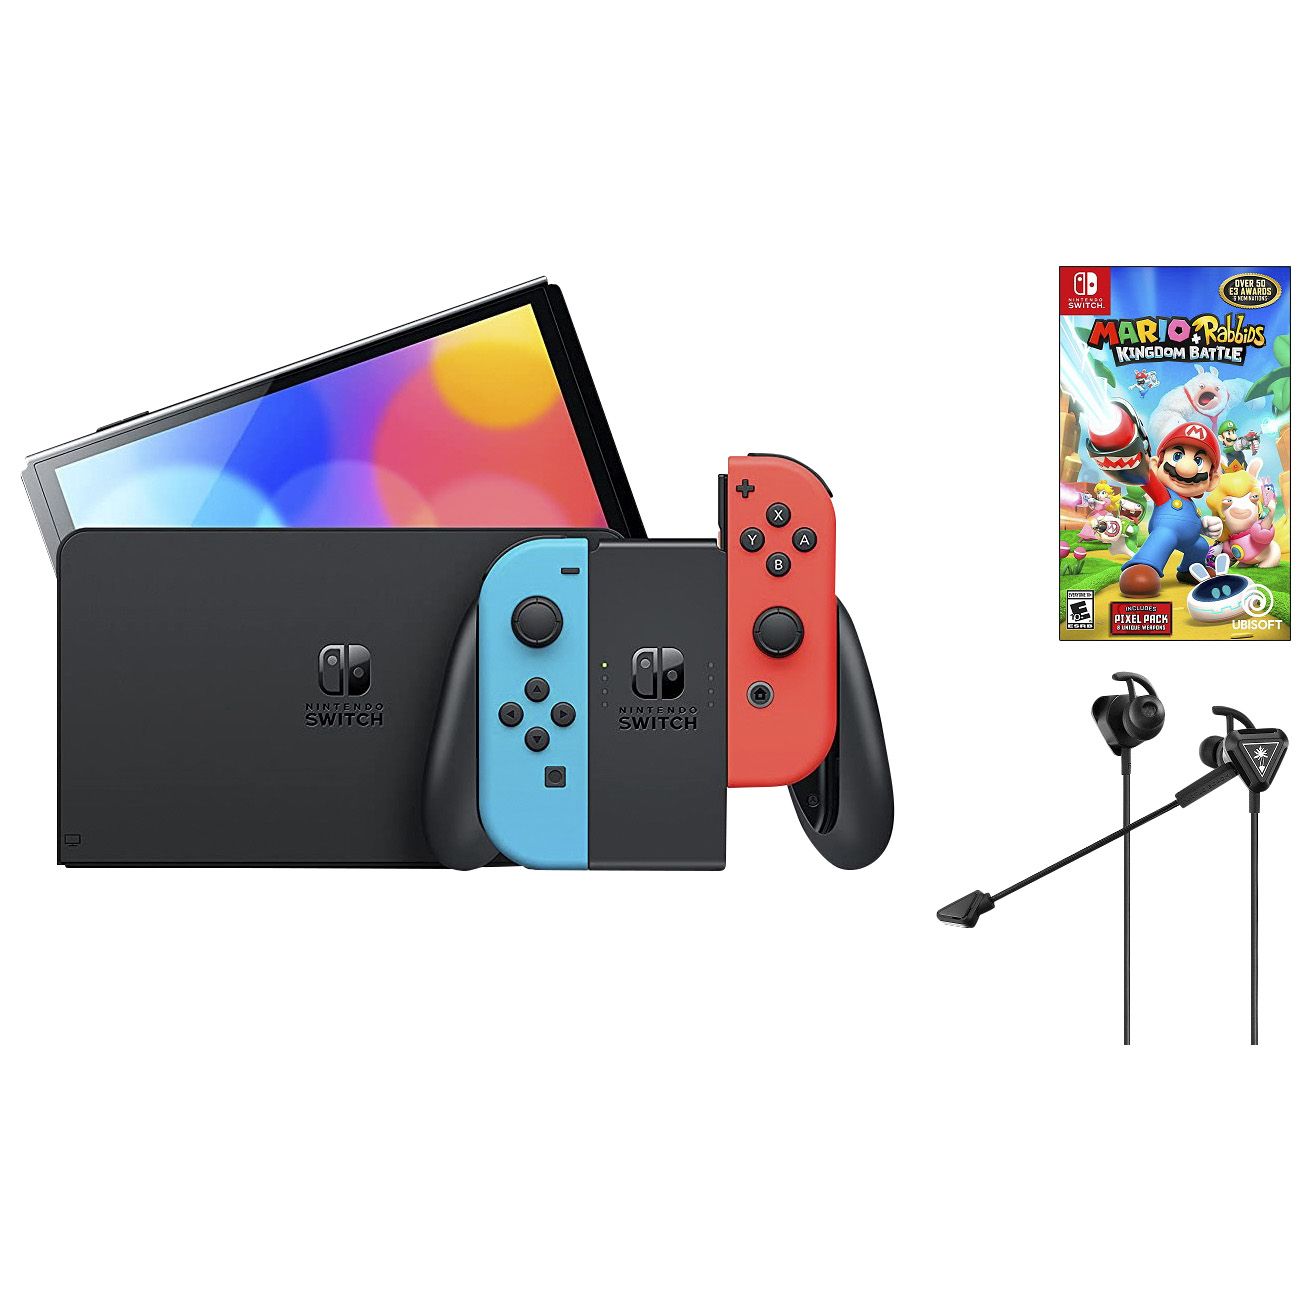 Nintendo Switch OLED consoles and bundles are still in stock at these  stores